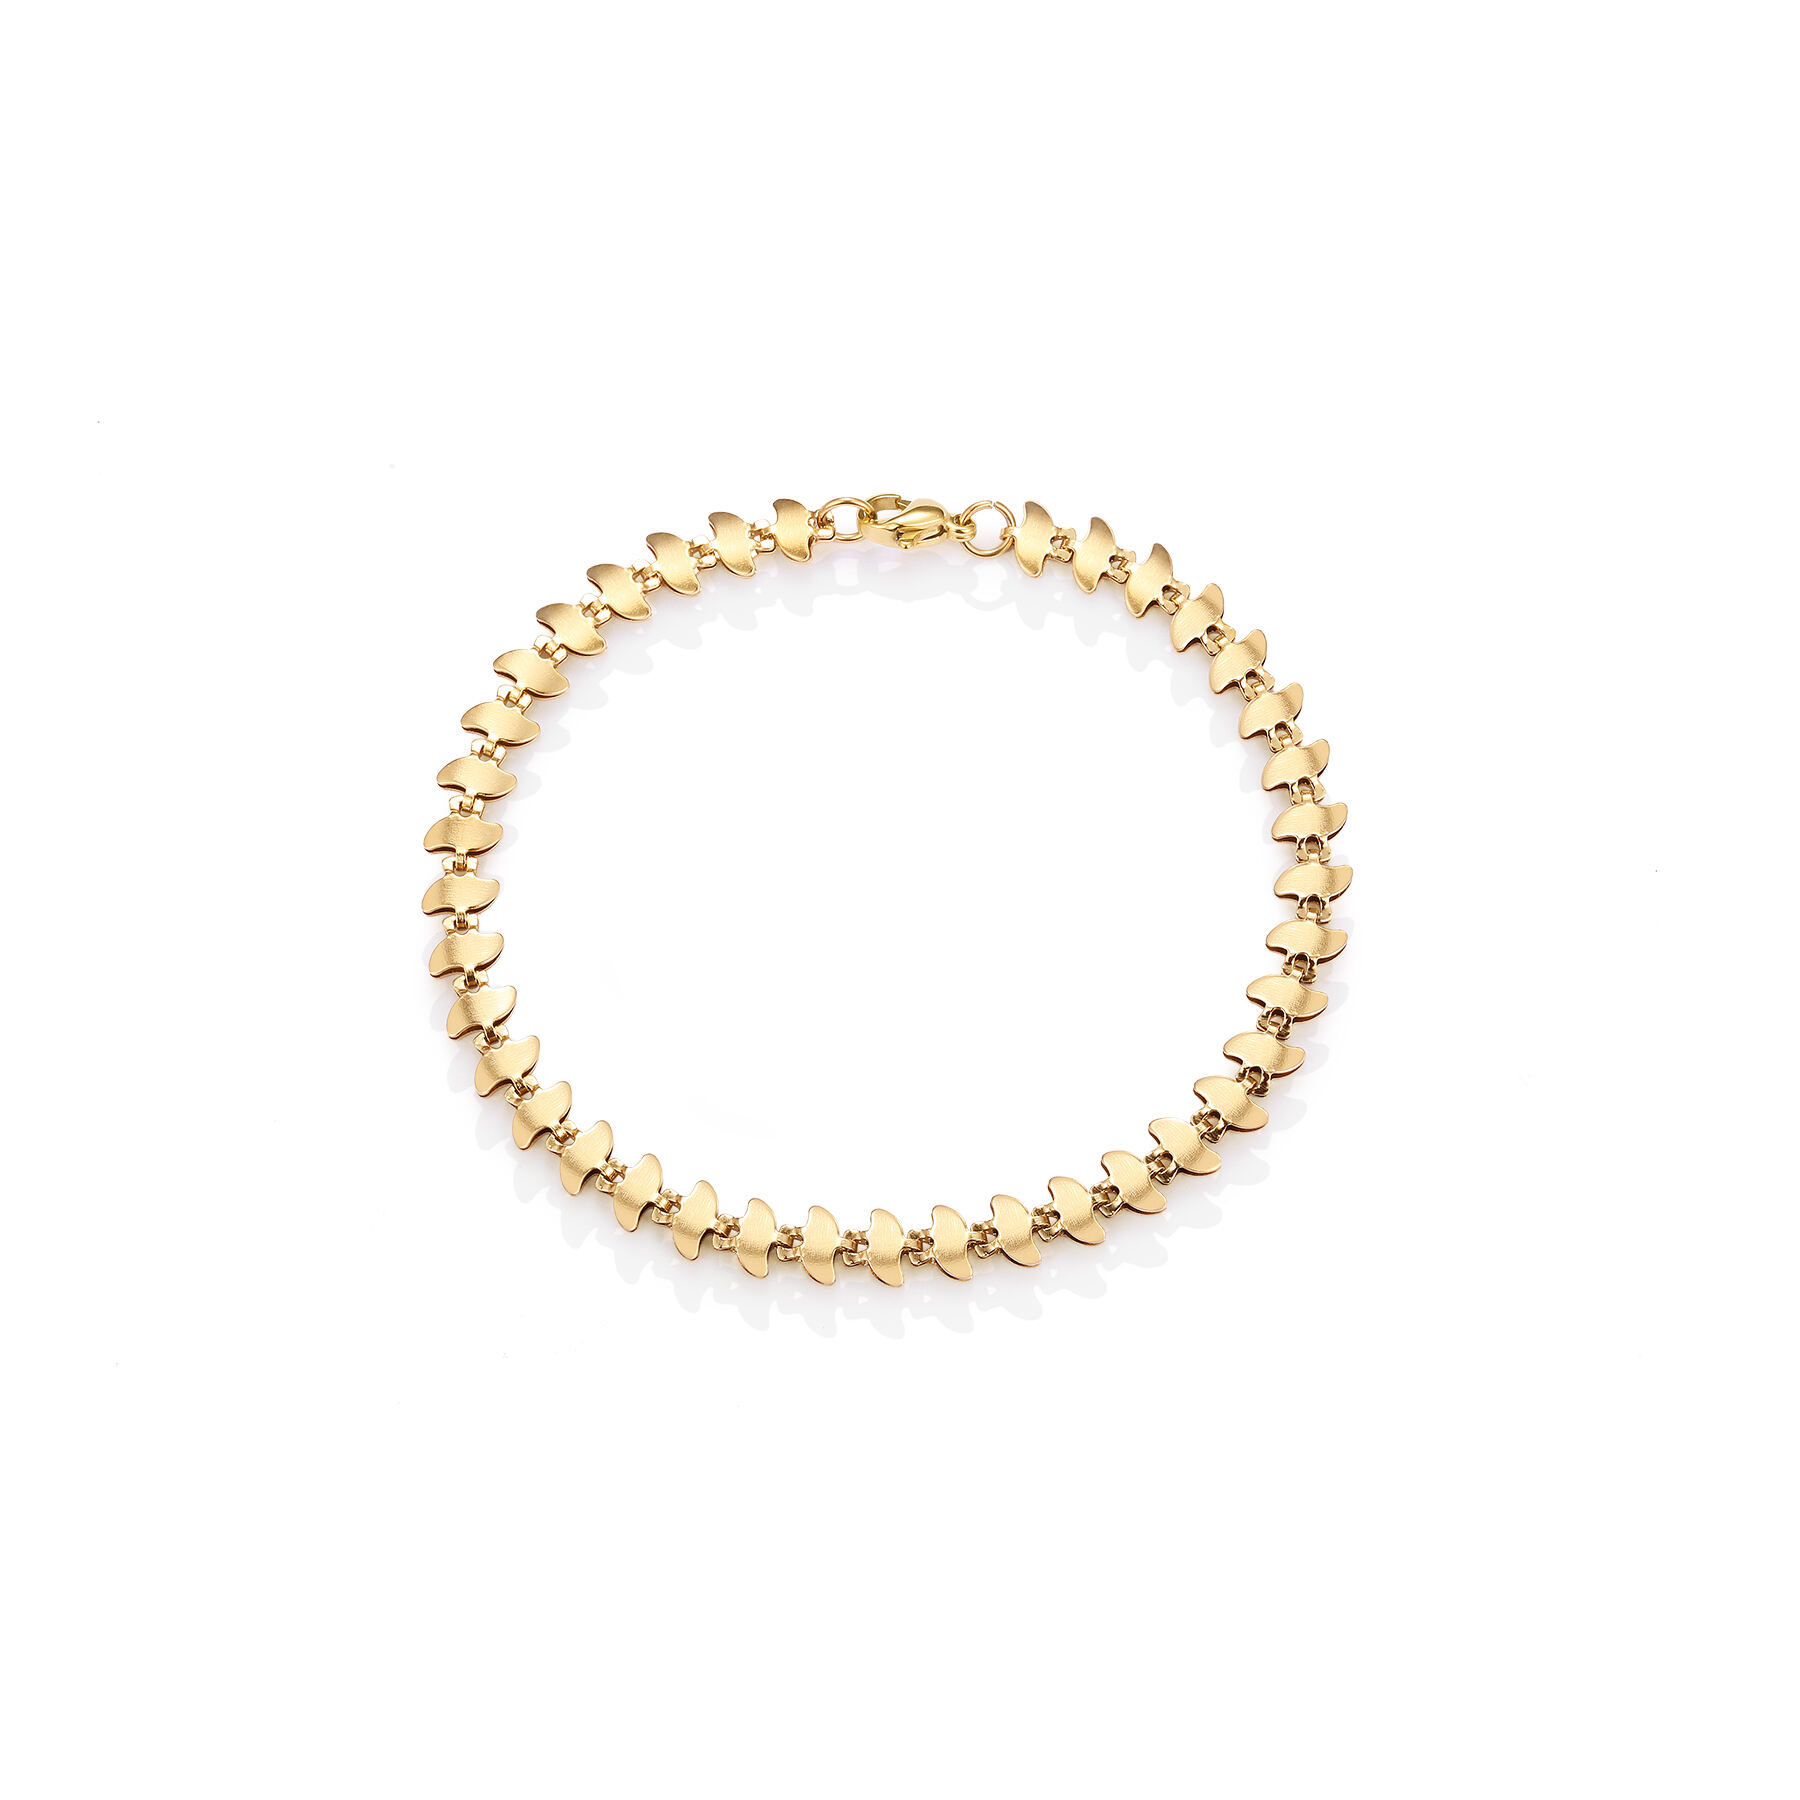 The Rotary vane shape bone chain bracelet with 18k gold plated